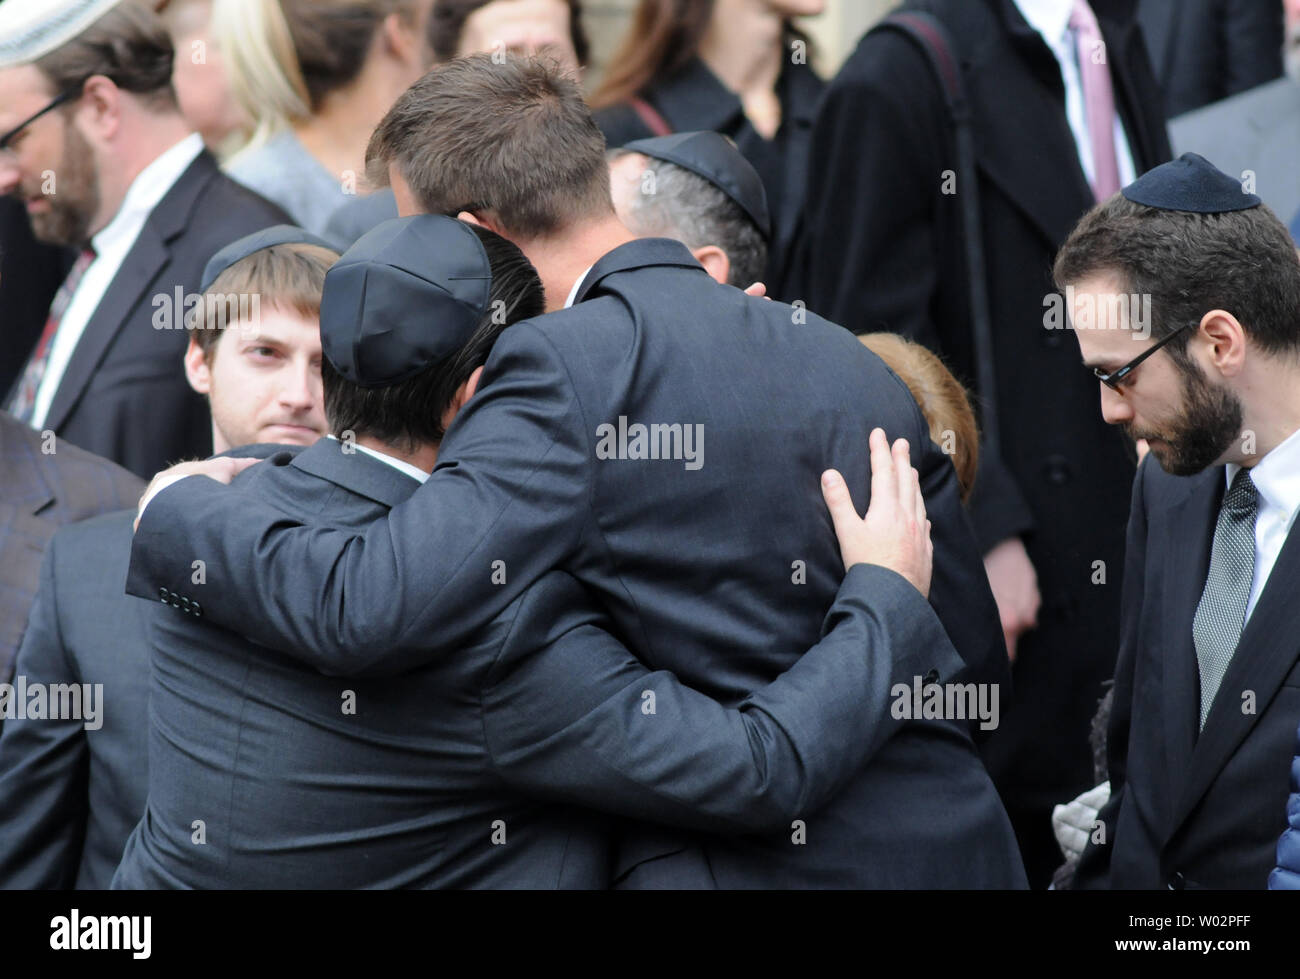 Mourners embrace  outside the Rodef Shalom Temples following the funeral services for brothers Cecil and David Rosenthal in Pittsburgh on October 30, 2018. The brothers where victims of the mass shooting where a gunman kill 11 people at the Tree of Life Synagogue.   Photo by Archie Carpenter/UPI Stock Photo